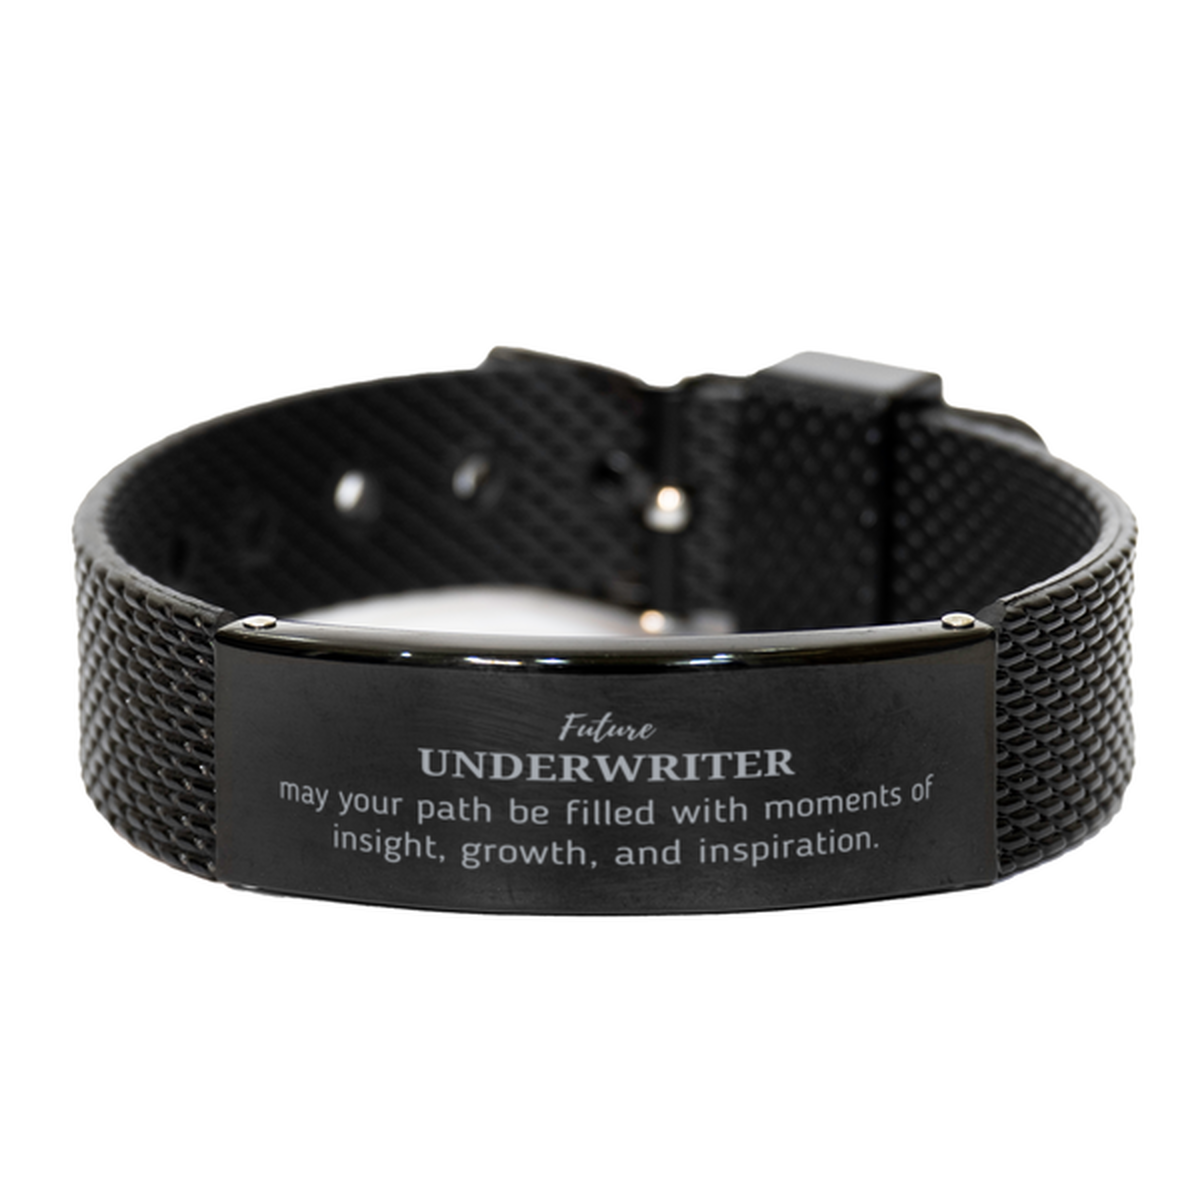 Future Underwriter Gifts, May your path be filled with moments of insight, Graduation Gifts for New Underwriter, Christmas Unique Black Shark Mesh Bracelet For Men, Women, Friends